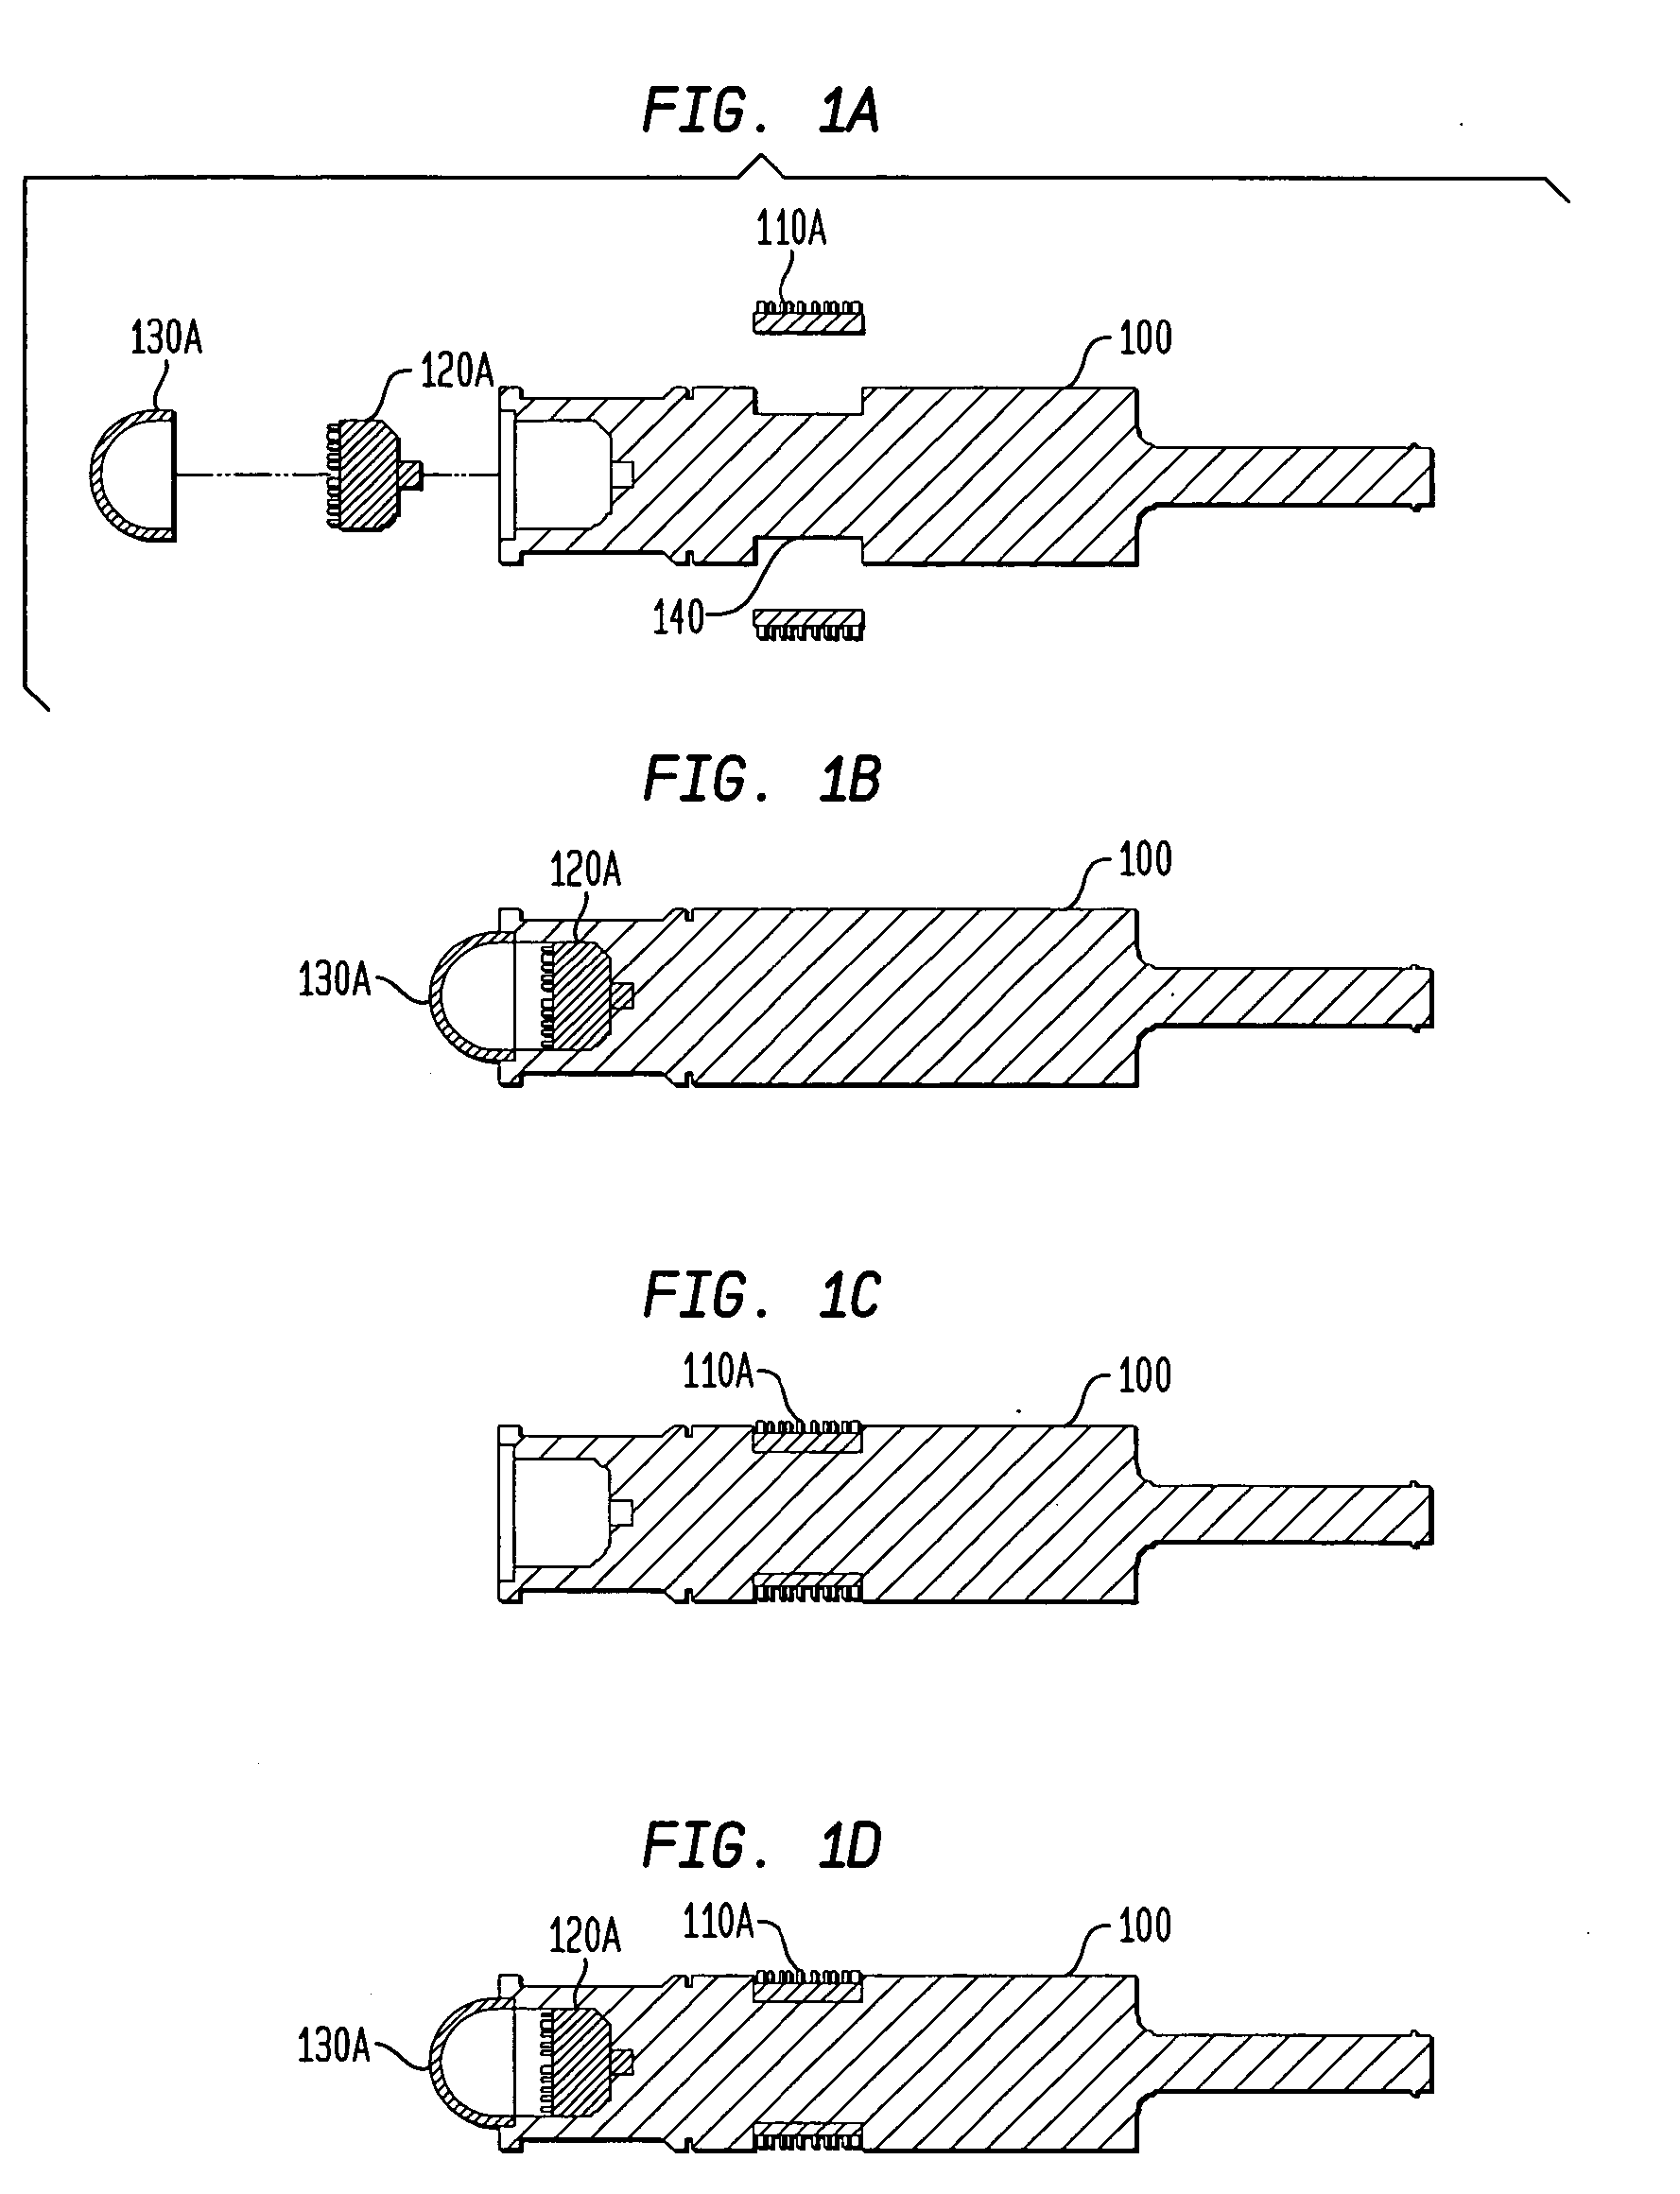 System and method for a flameless tracer/marker utilizing an electronic light source